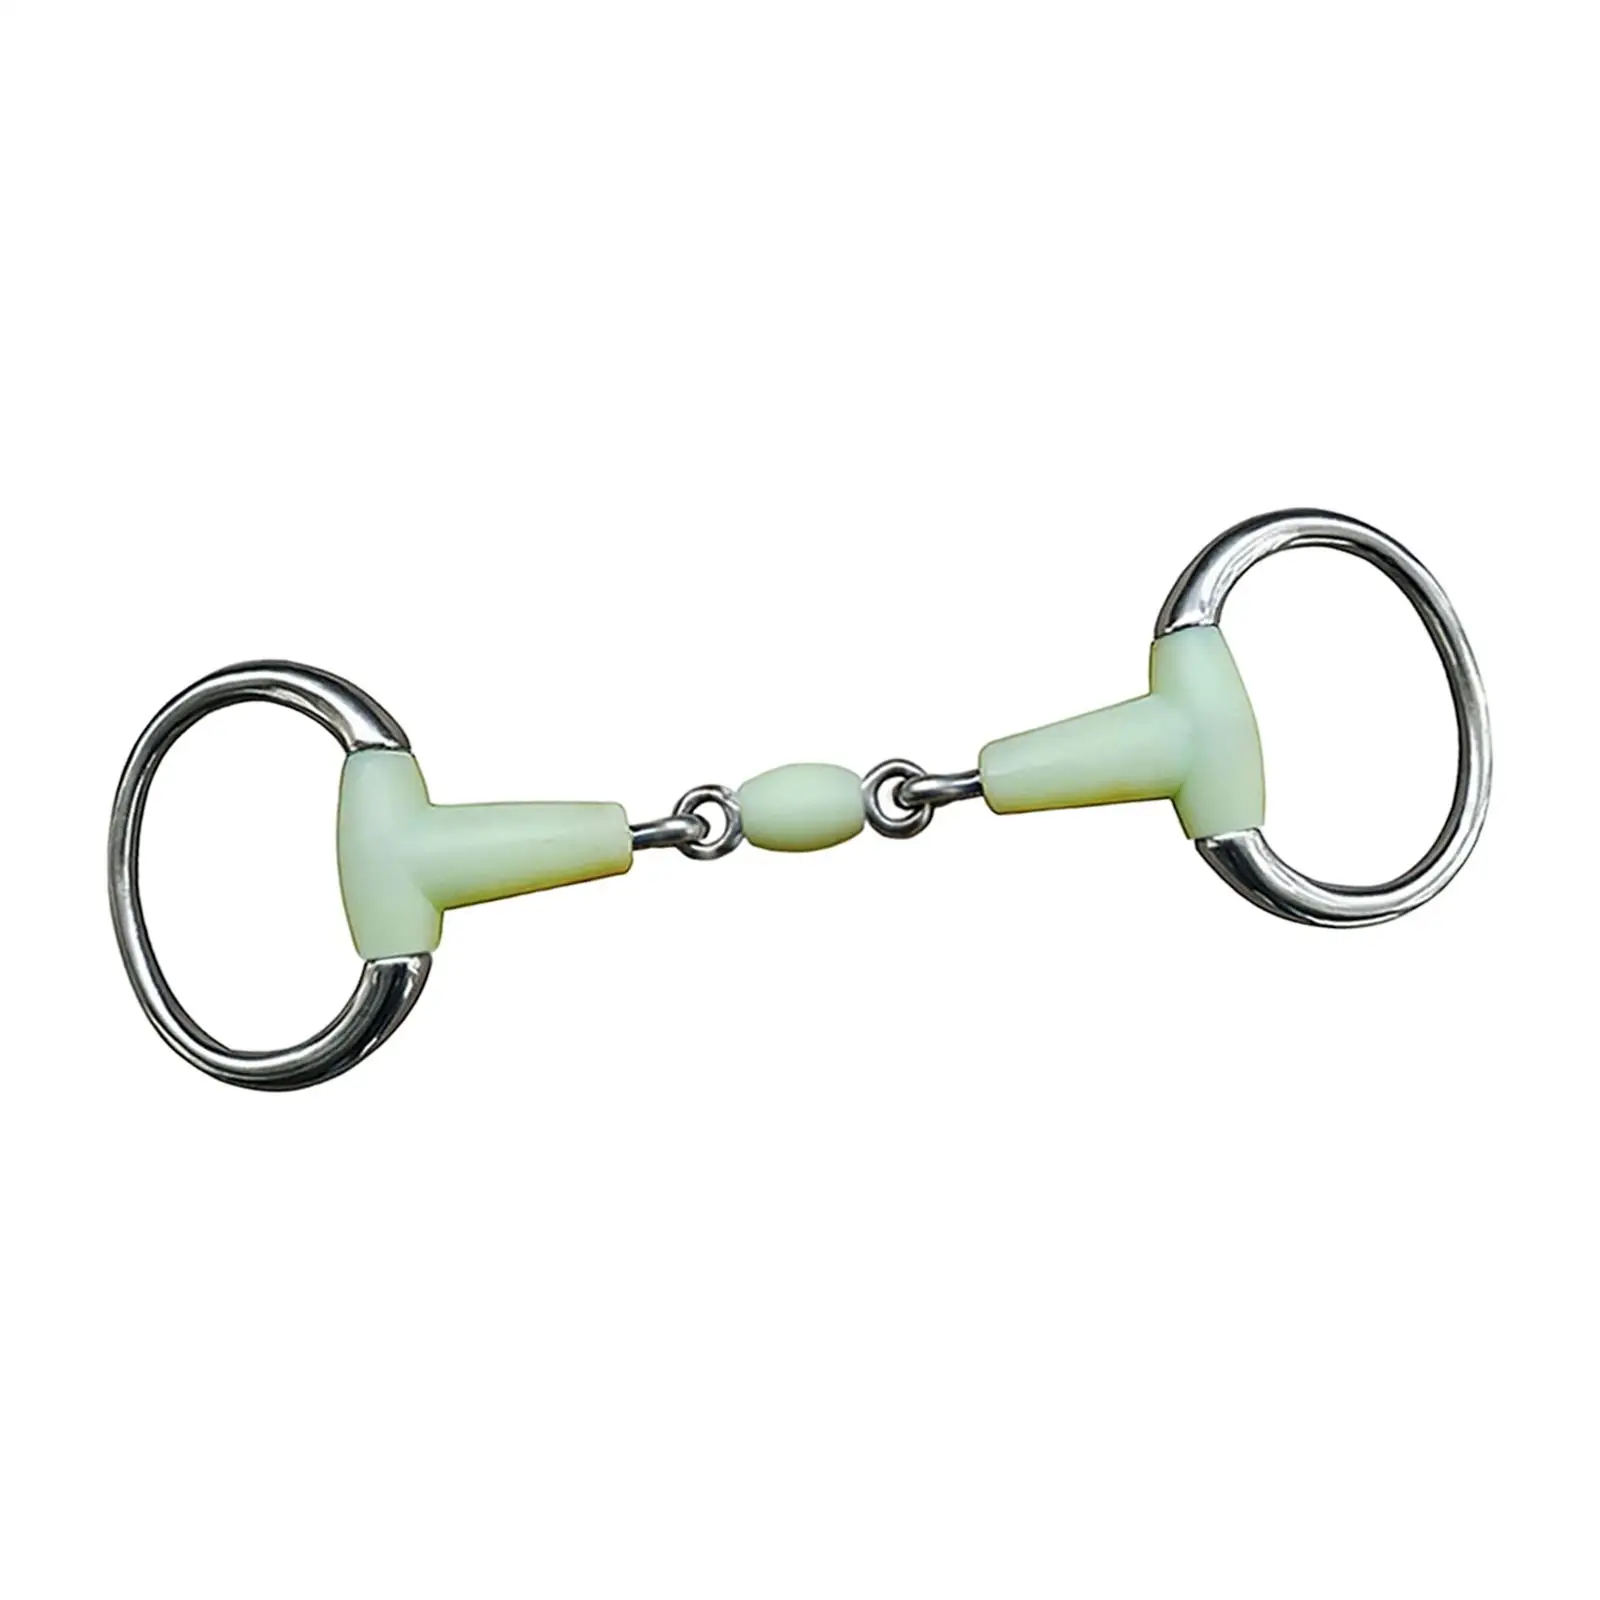 Ultralight Horse Bit Mouth, Horse Training Snaffle Tool, for Outdoor Horse Riding Equipment Supplies